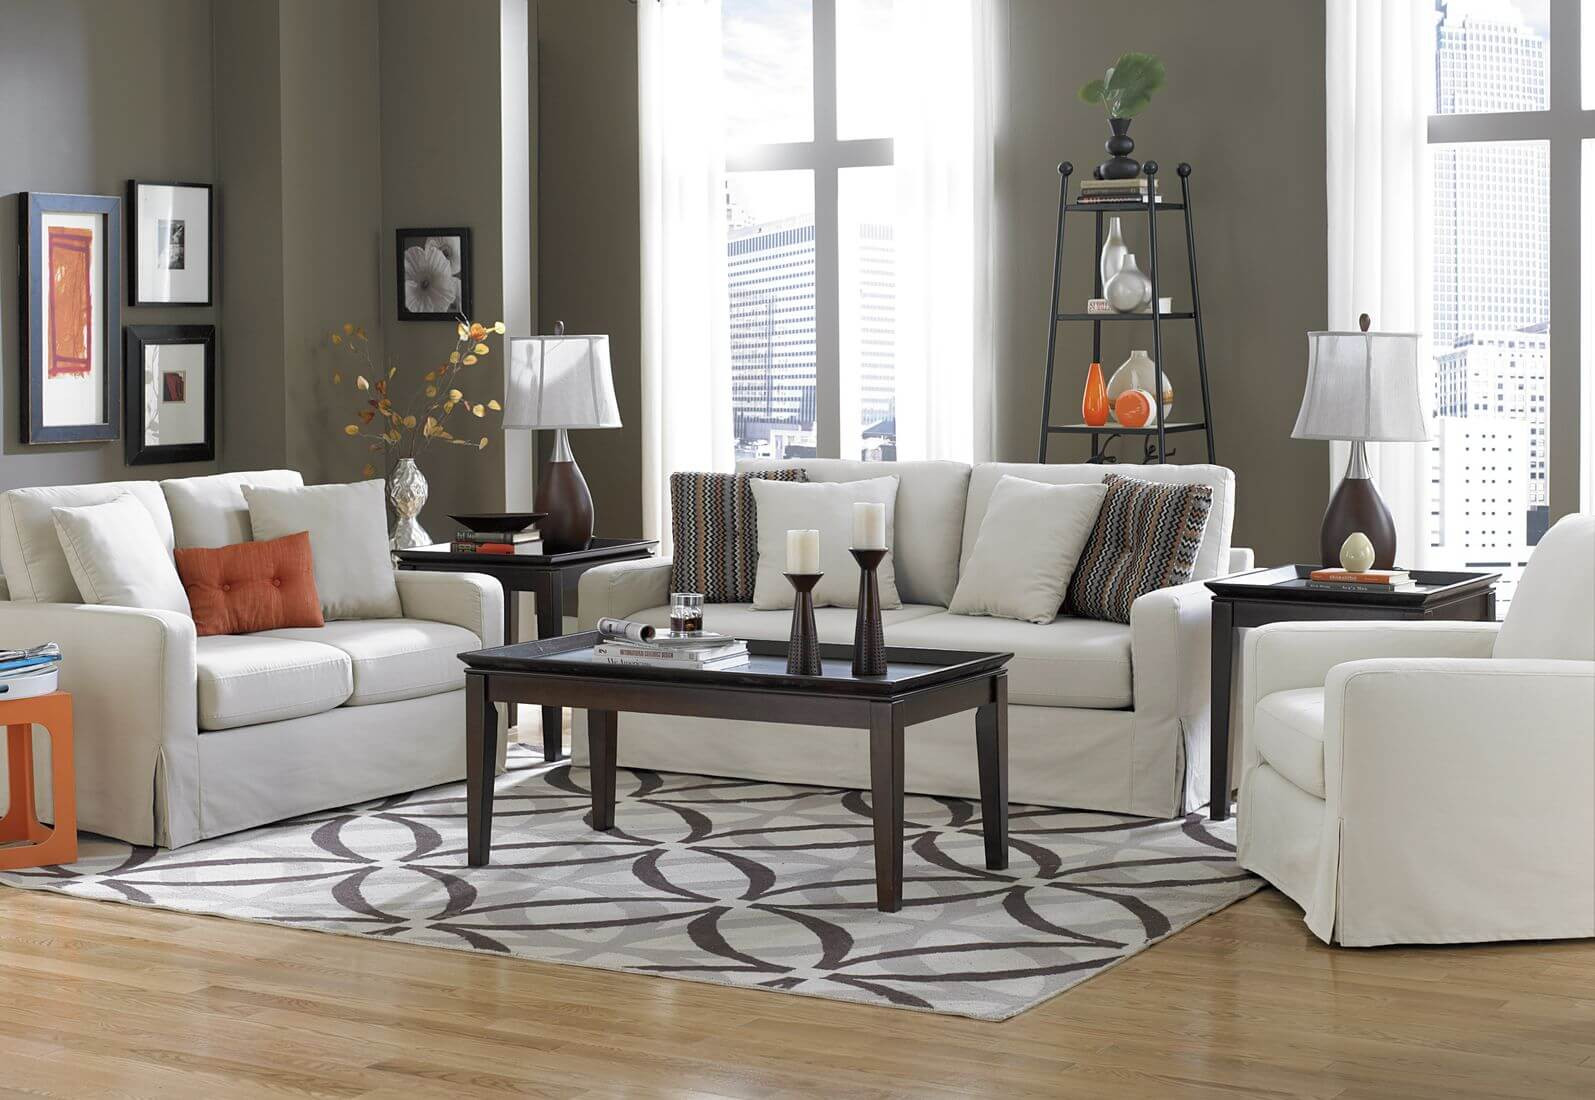 Accent Rugs For Living Room
 40 Living Rooms with Area Rugs for Warmth & Richness